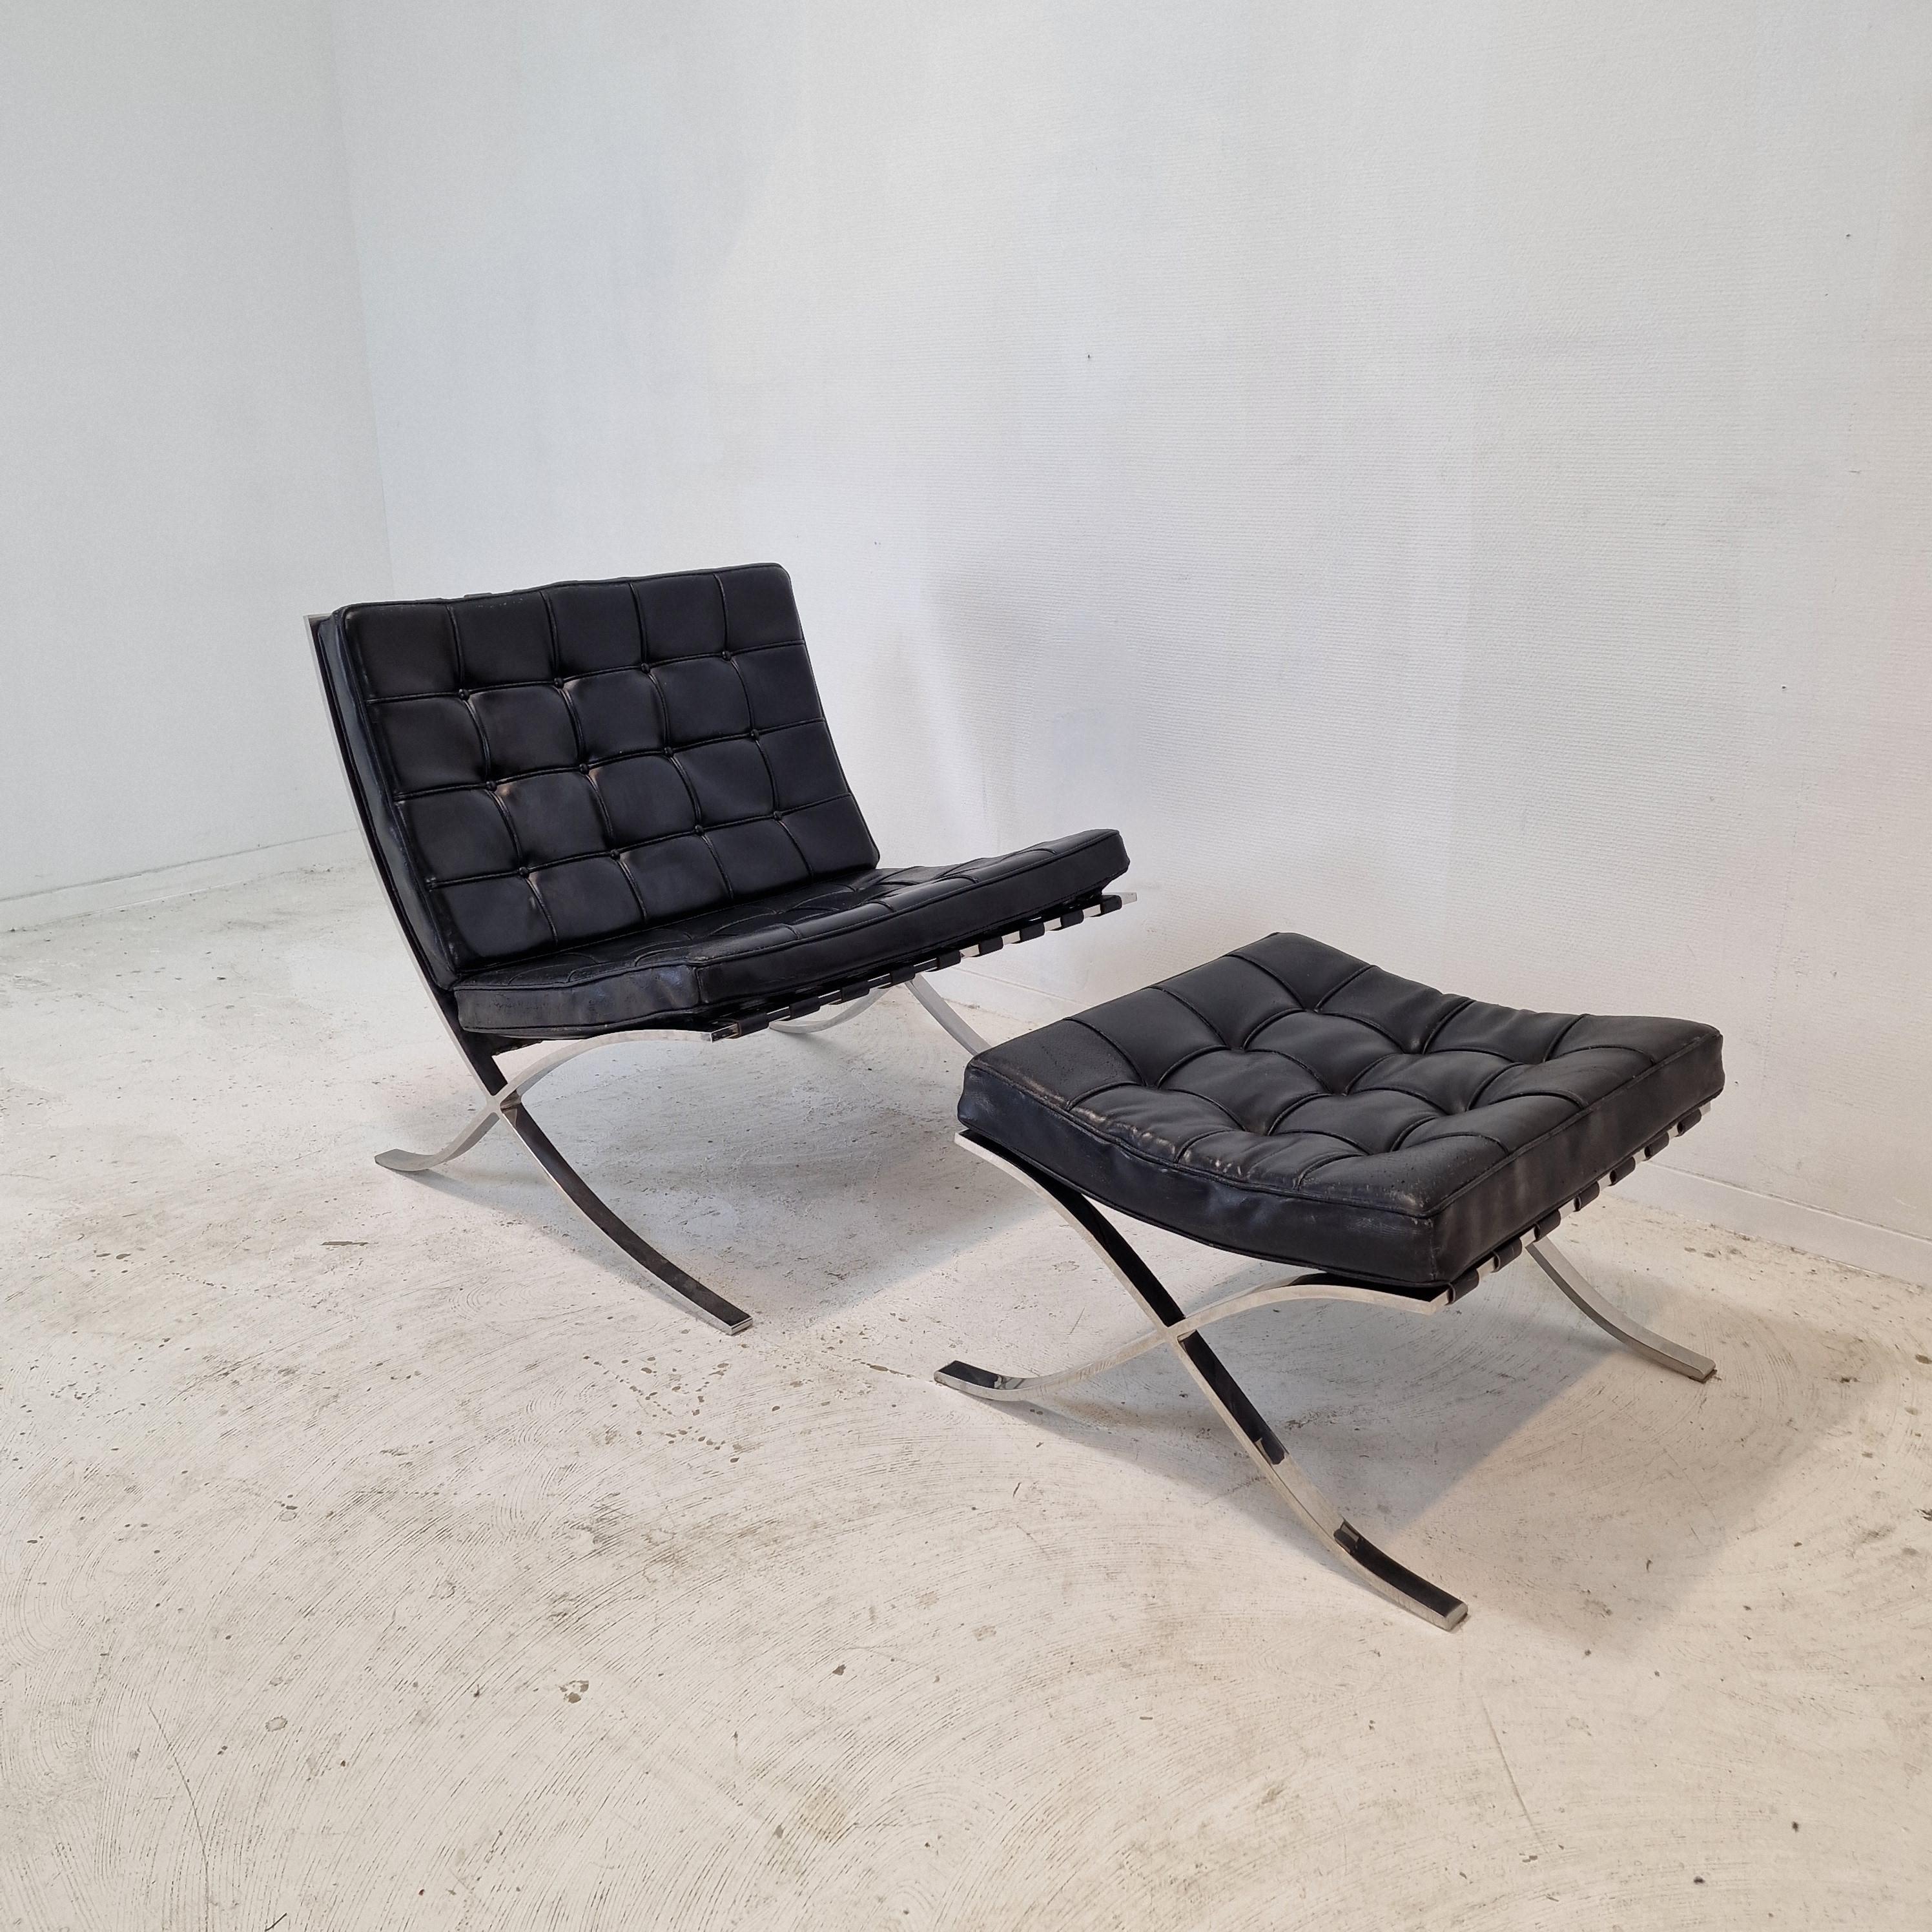 Very nice Barcelona chair and ottoman by Mies van der Rohe, fabricated in the 70's by Knoll.

Produced in black leather with a very solid polished stainless frame.

The black leather upholstery is in used condition with the normal traces of use, it